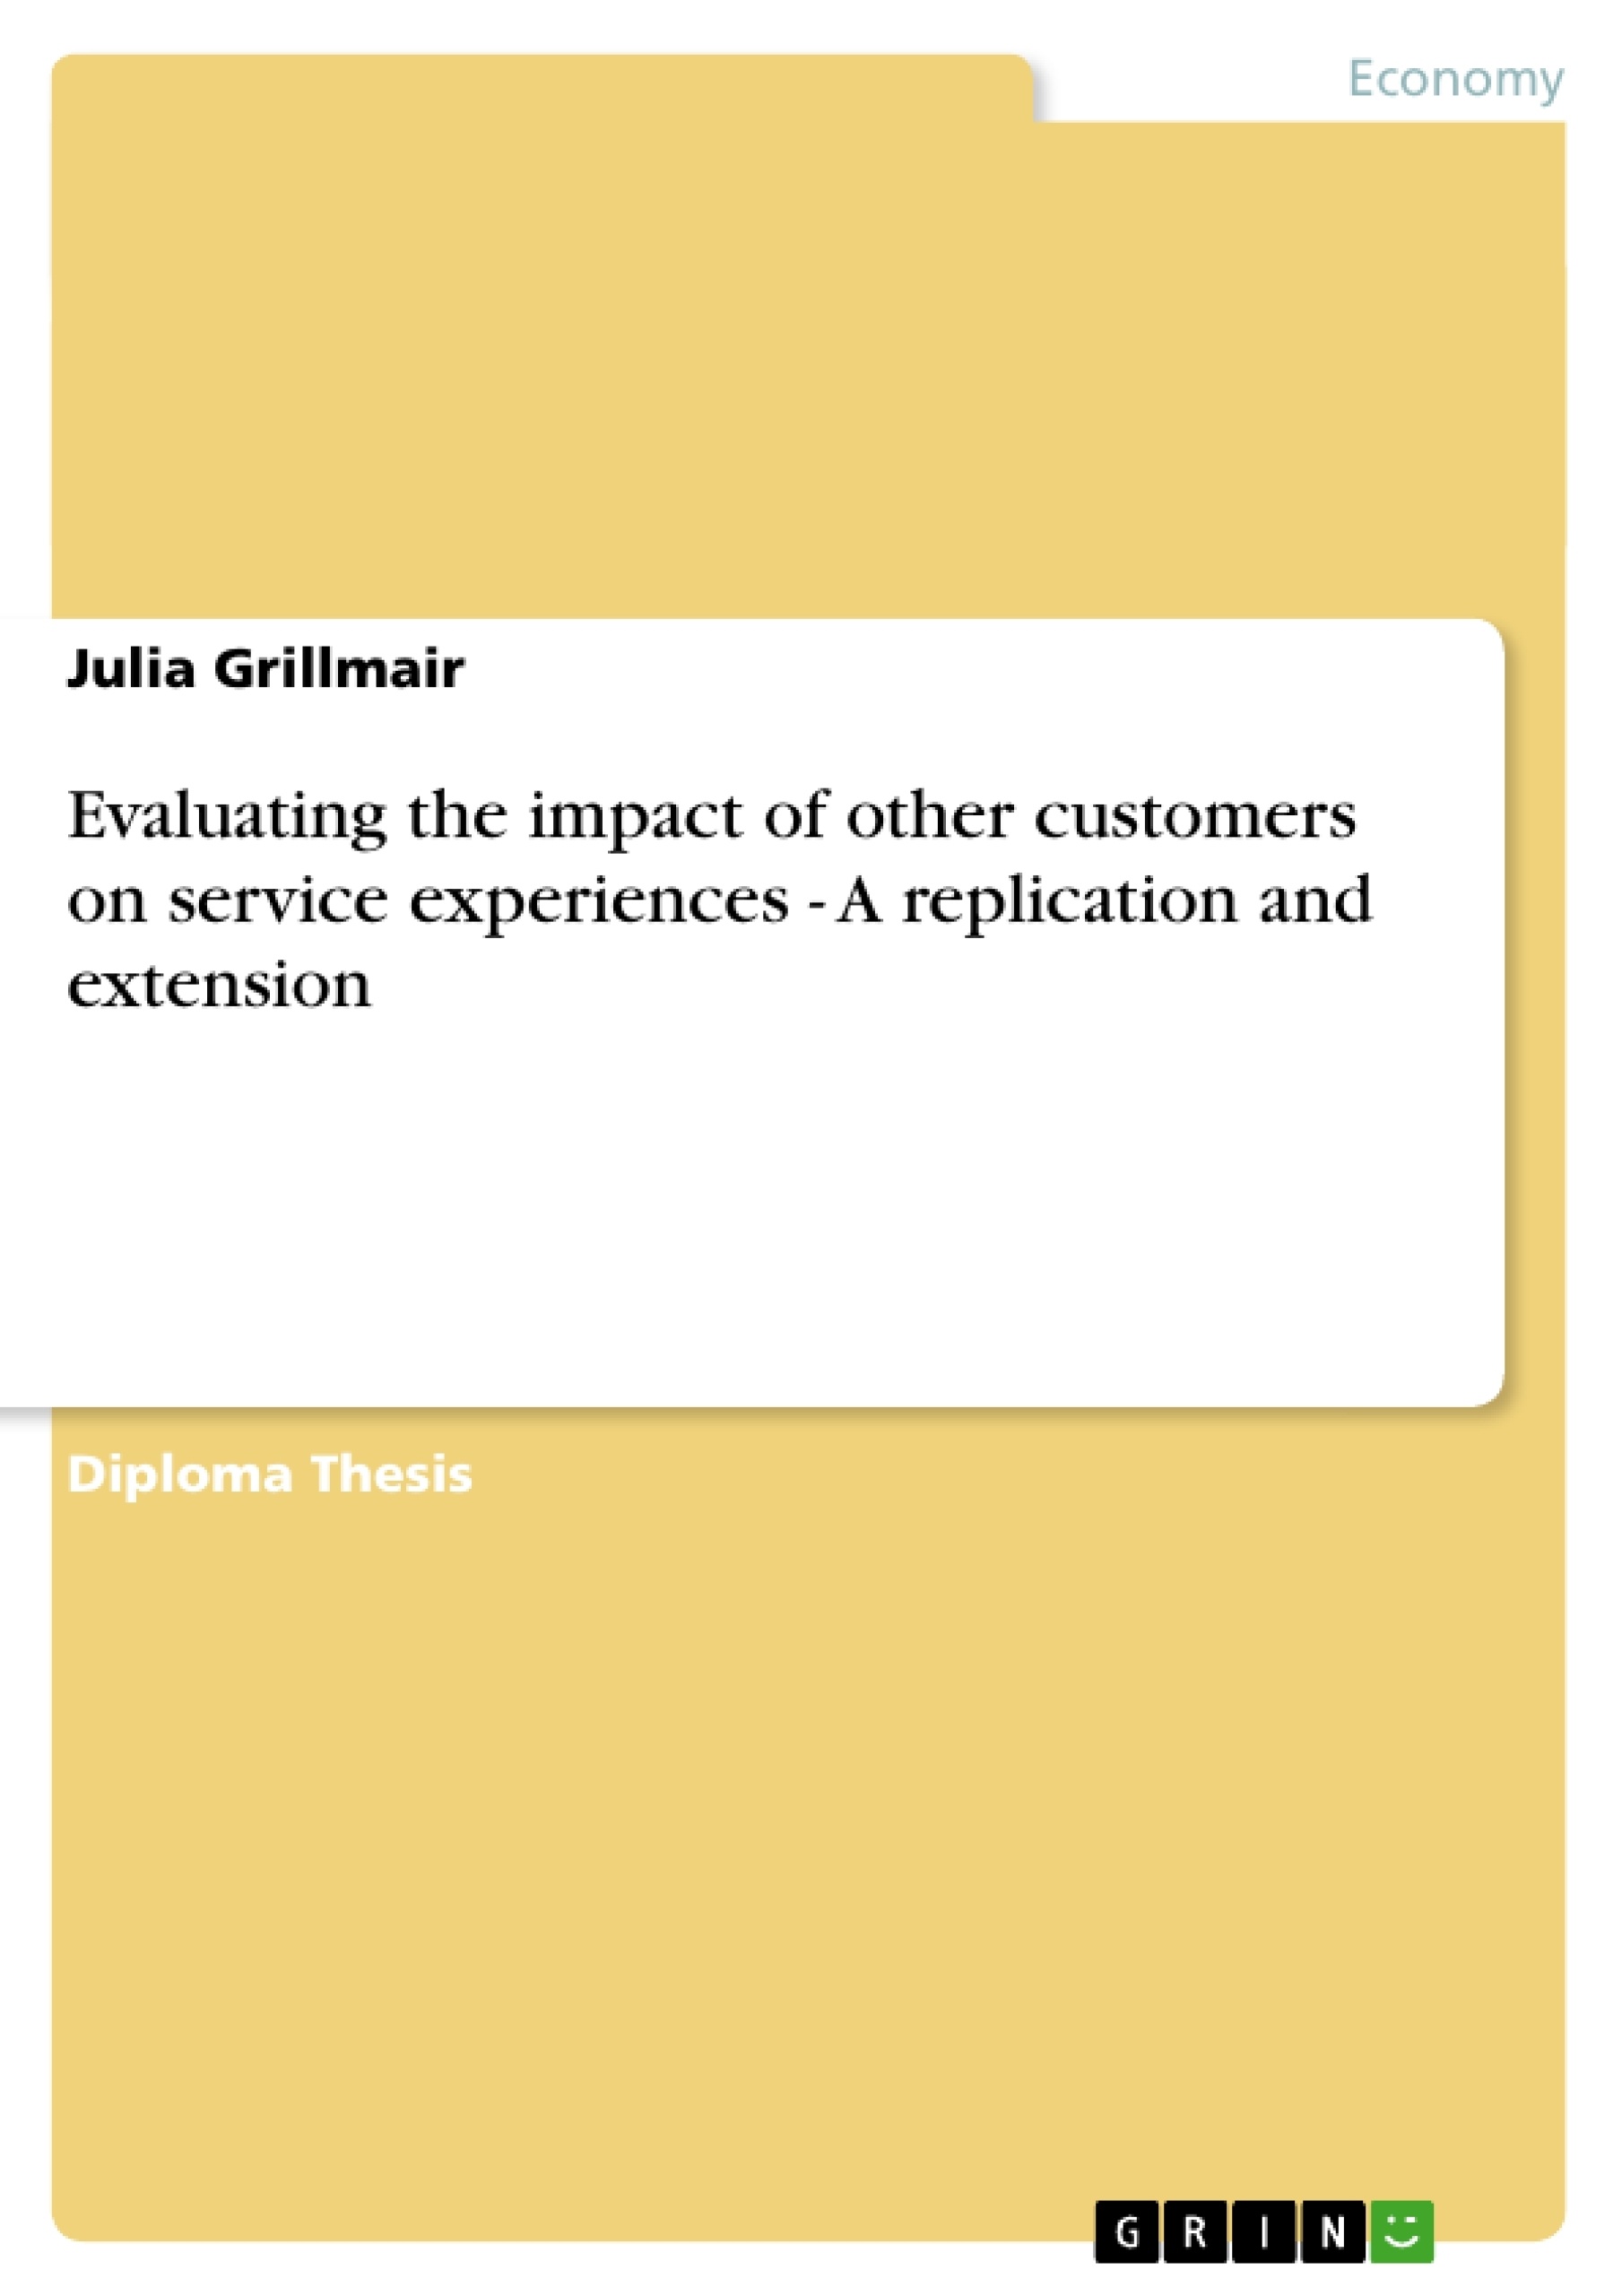 Title: Evaluating the impact of other customers on service experiences - A replication and extension